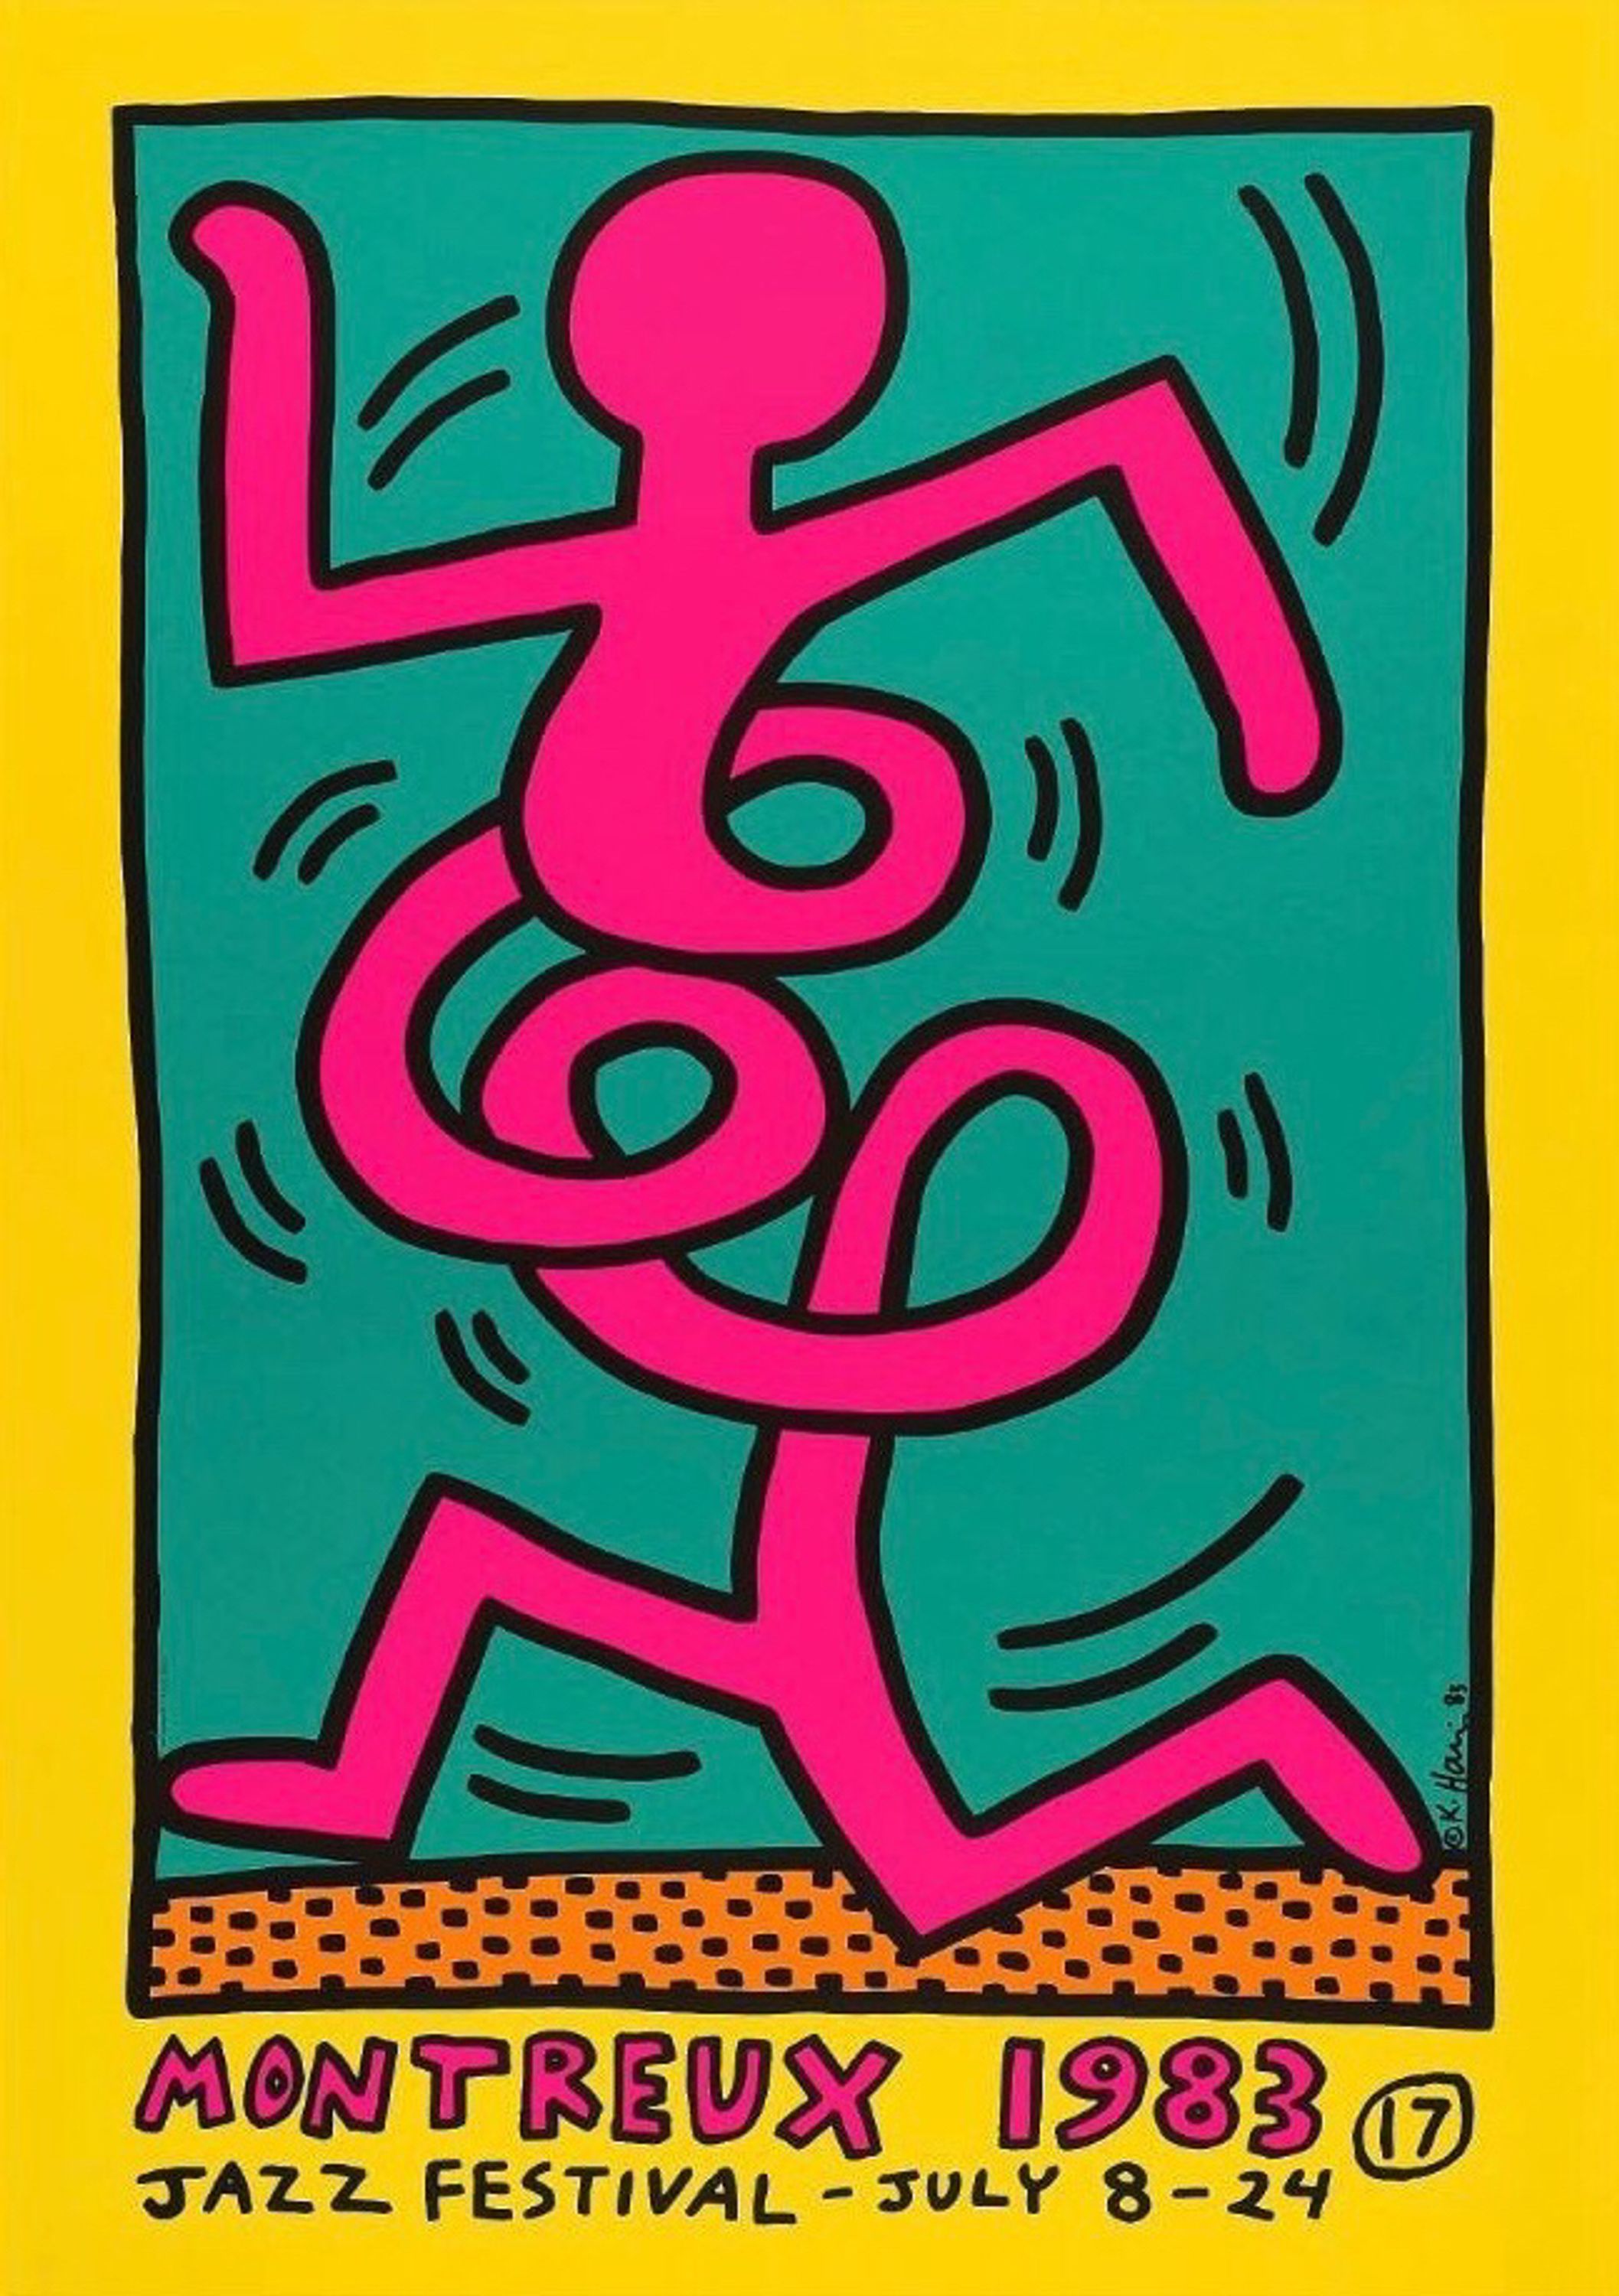 Keith Haring Montreux 1983 PosterKeith Haring Art PrintWall Decor 